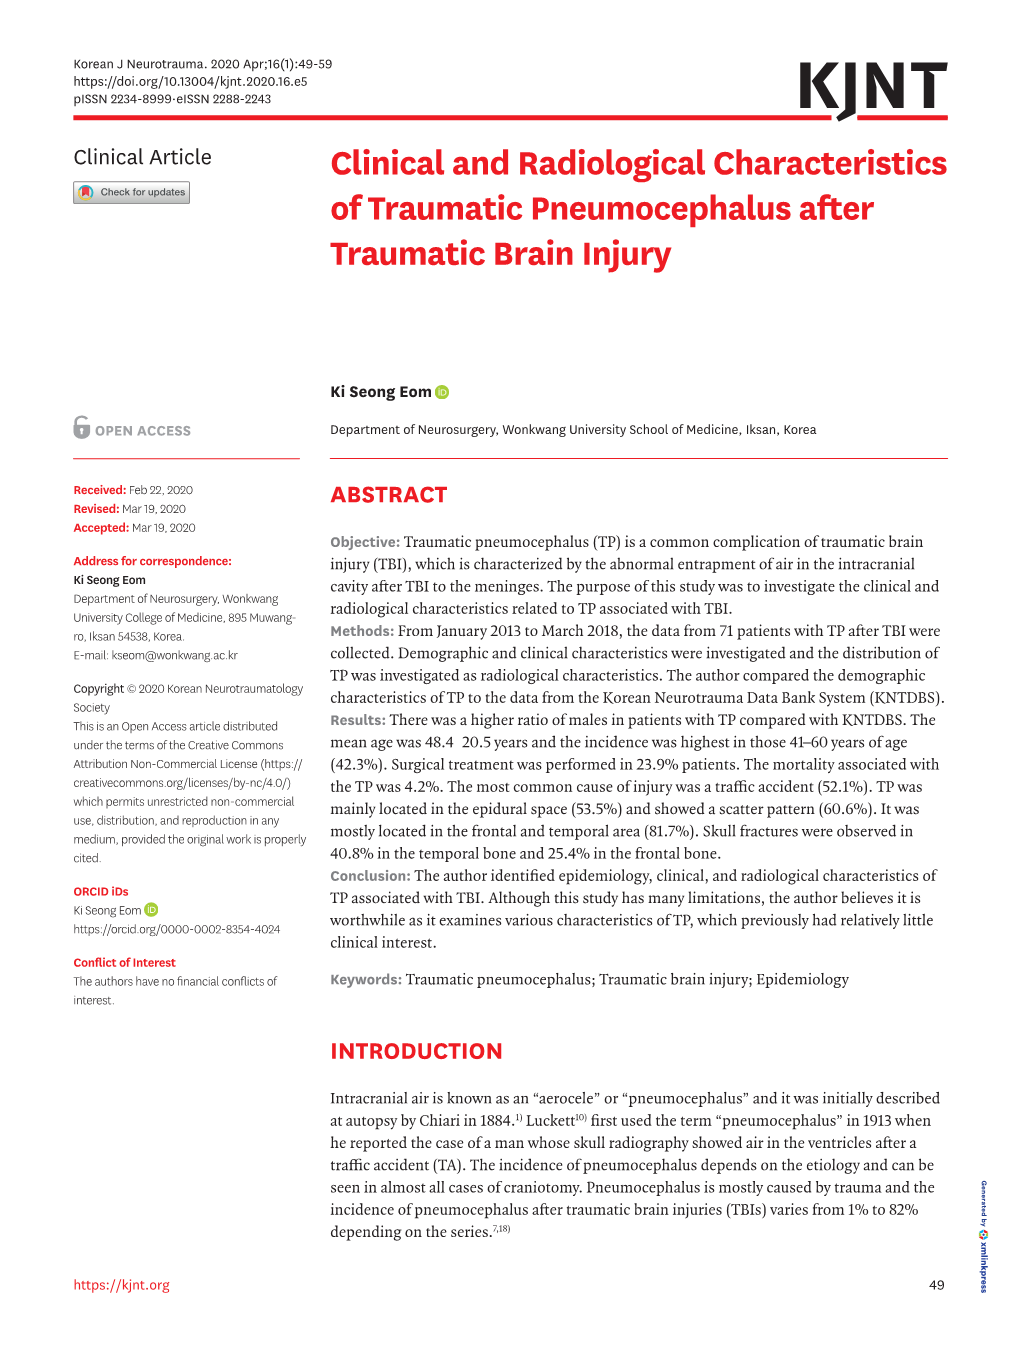 Clinical and Radiological Characteristics of Traumatic Pneumocephalus After Traumatic Brain Injury